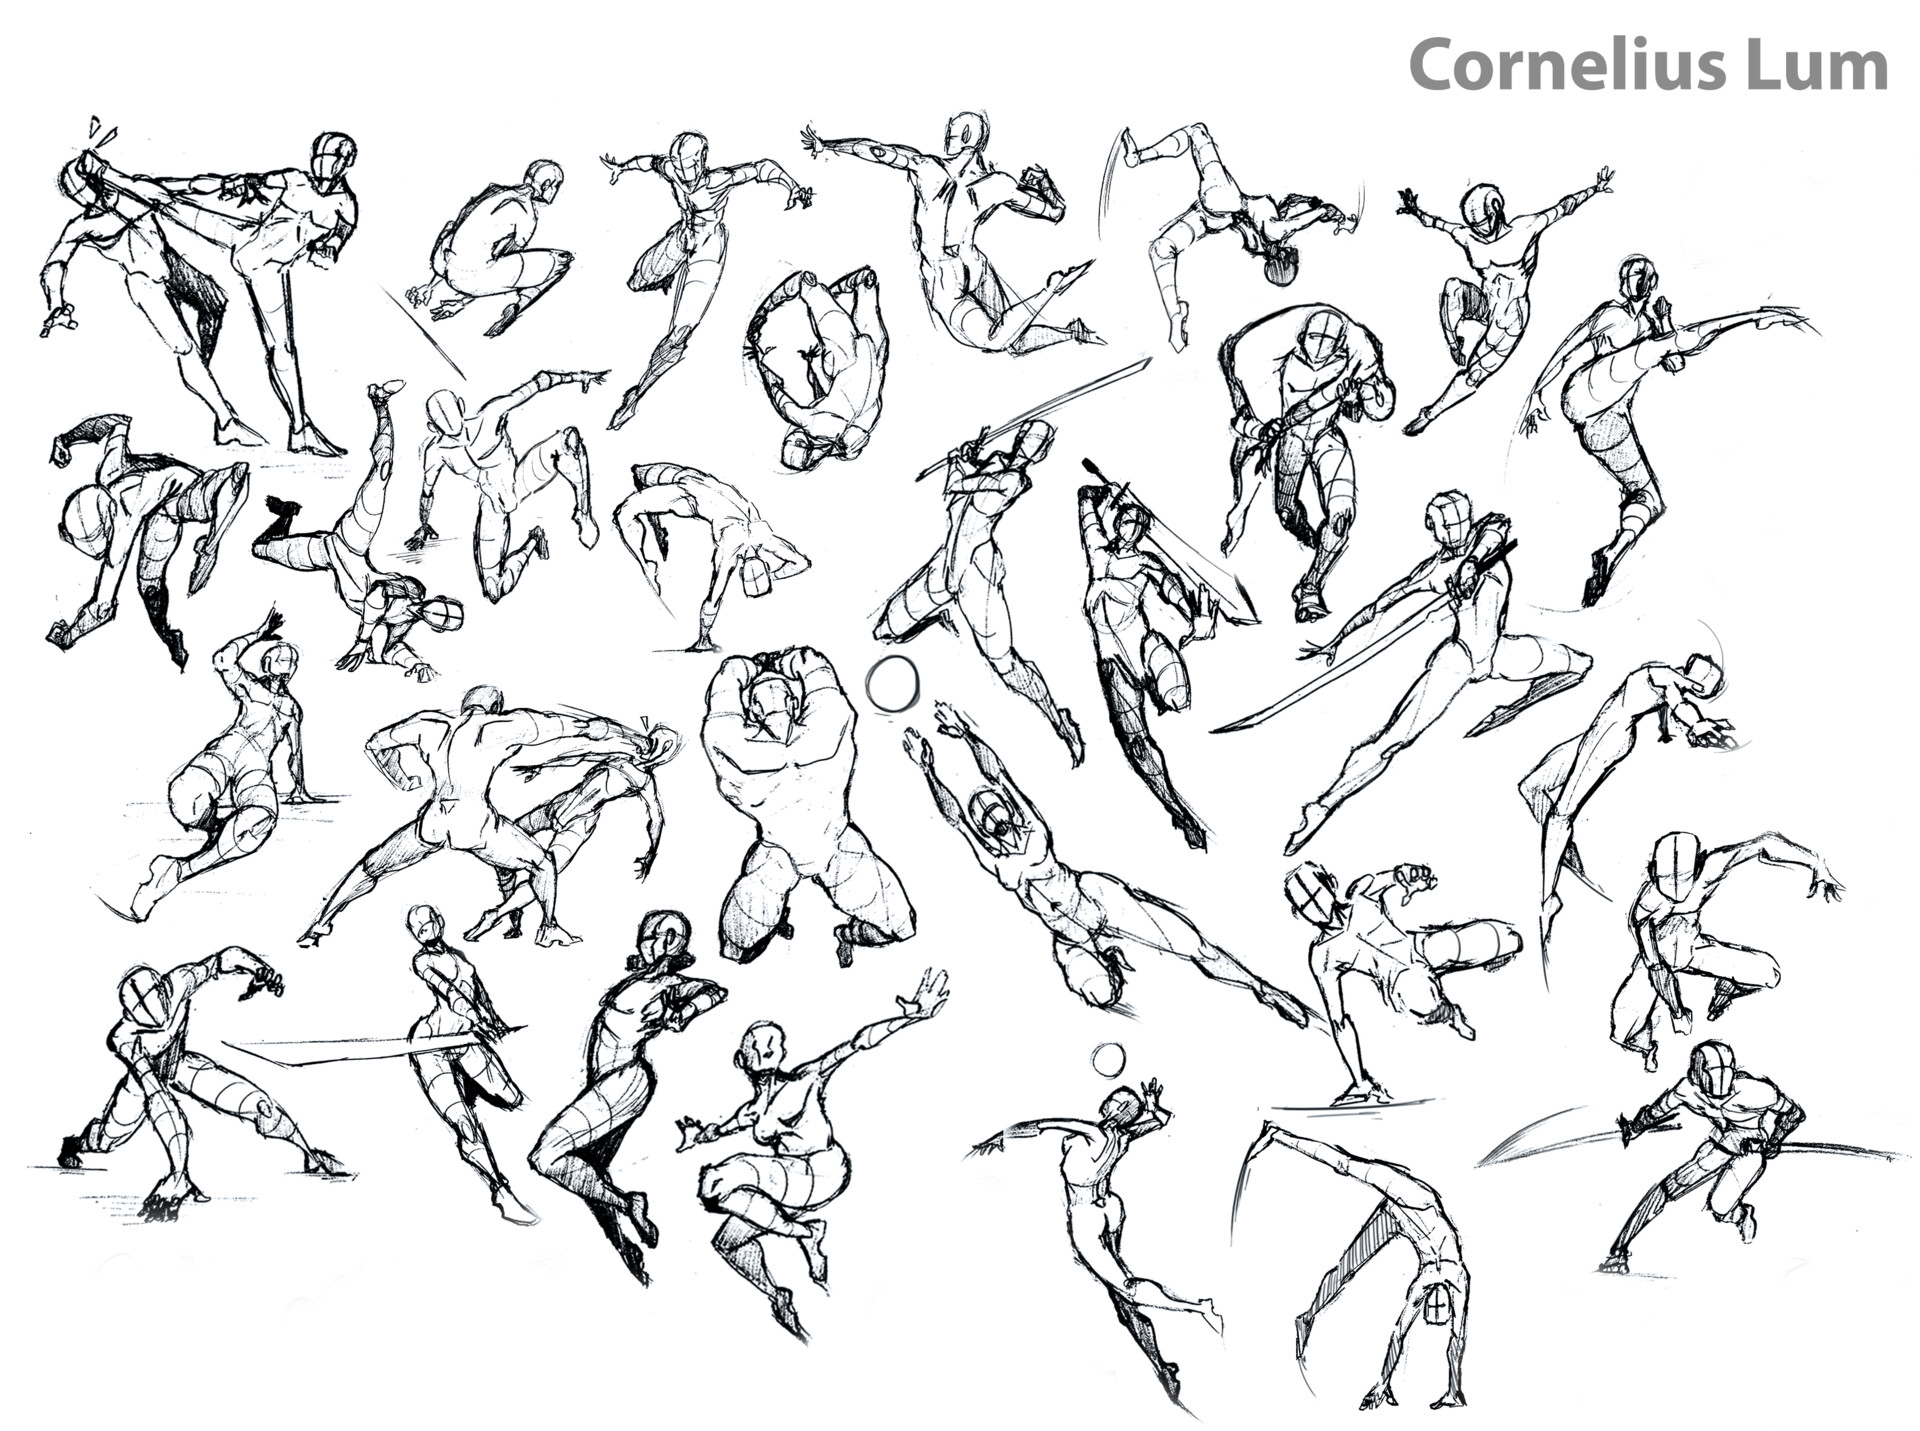 ArtStation - 102 Action poses - Figure Drawing